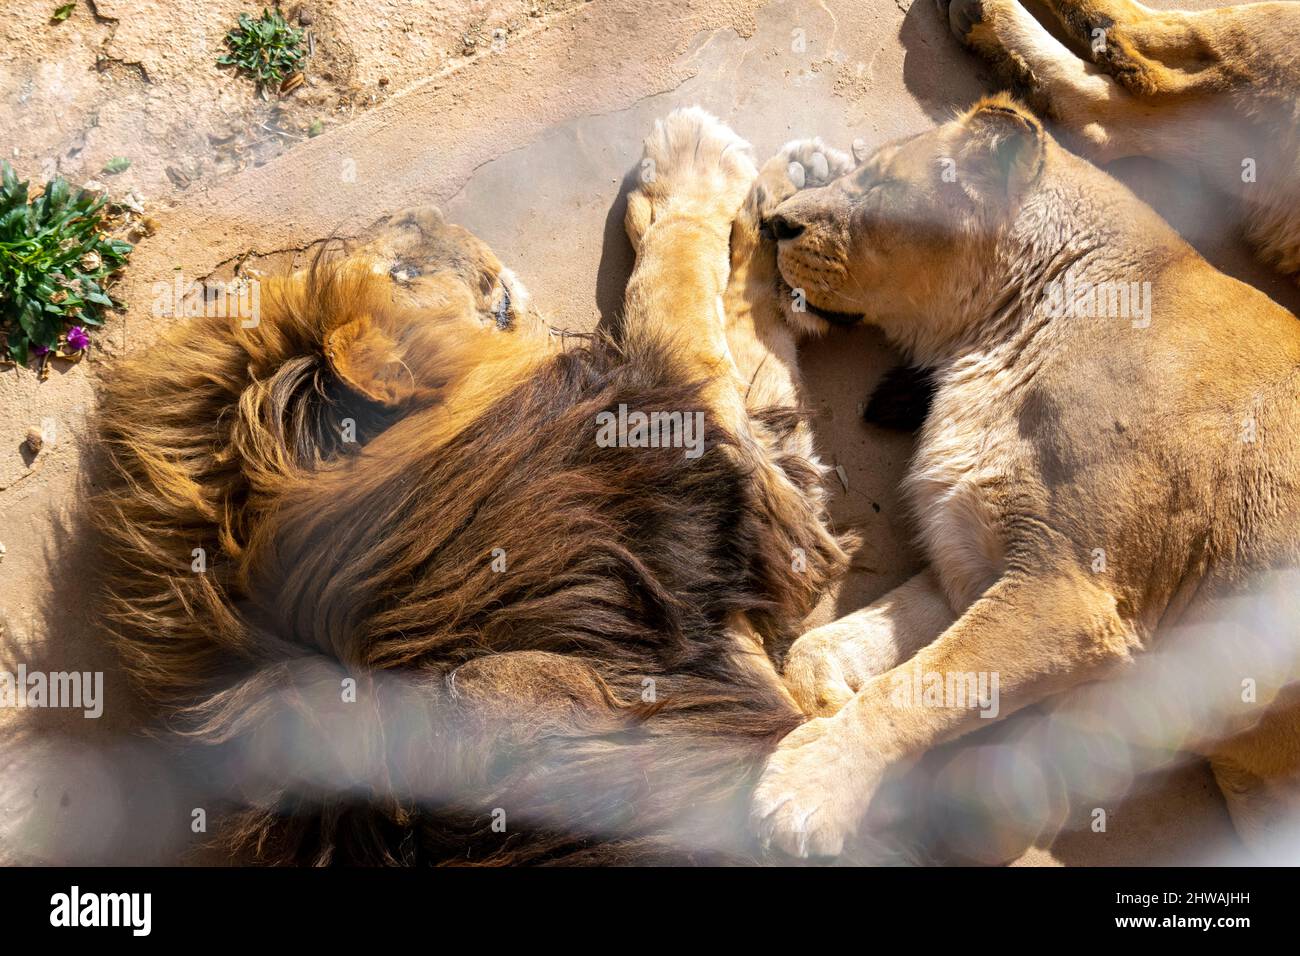 Lion couple resting at the sun. Lion couple in love. Lion hug. Animals valentine's day. Wild lovers. Stock Photo